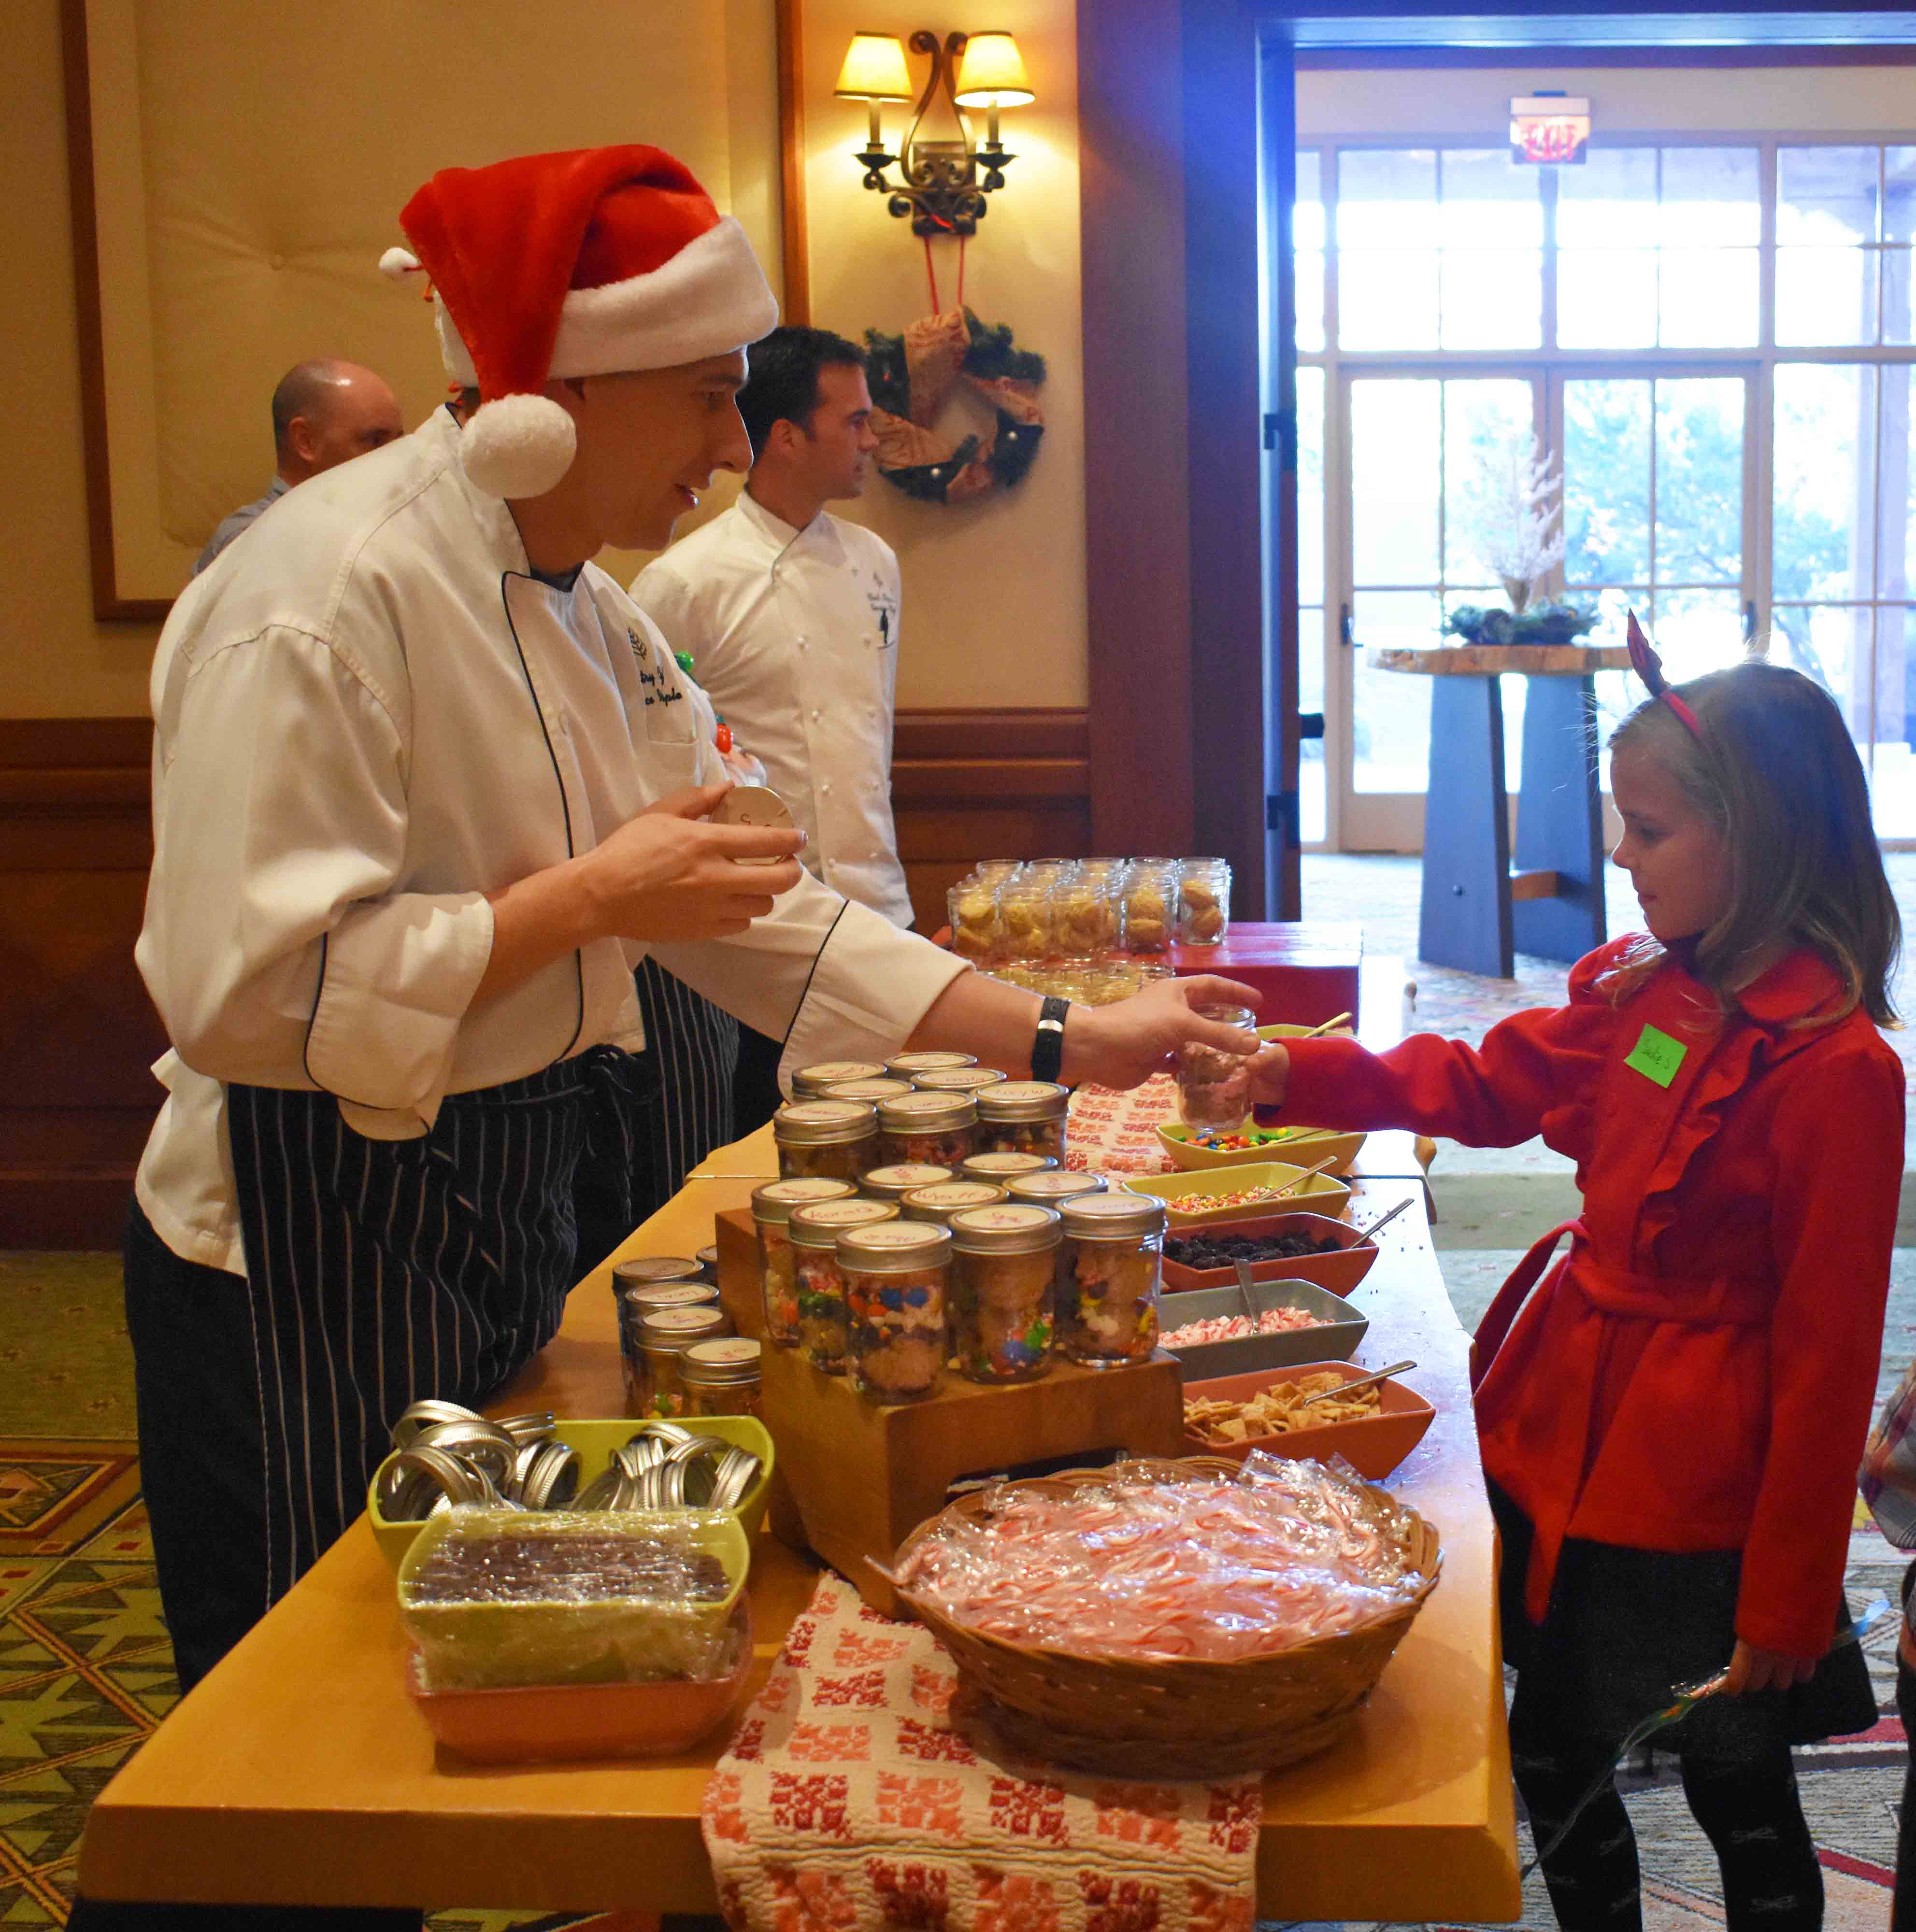 Arizona Four Seasons Christmas. Cookies with Claus Event at Four Seasons Scottsdale.